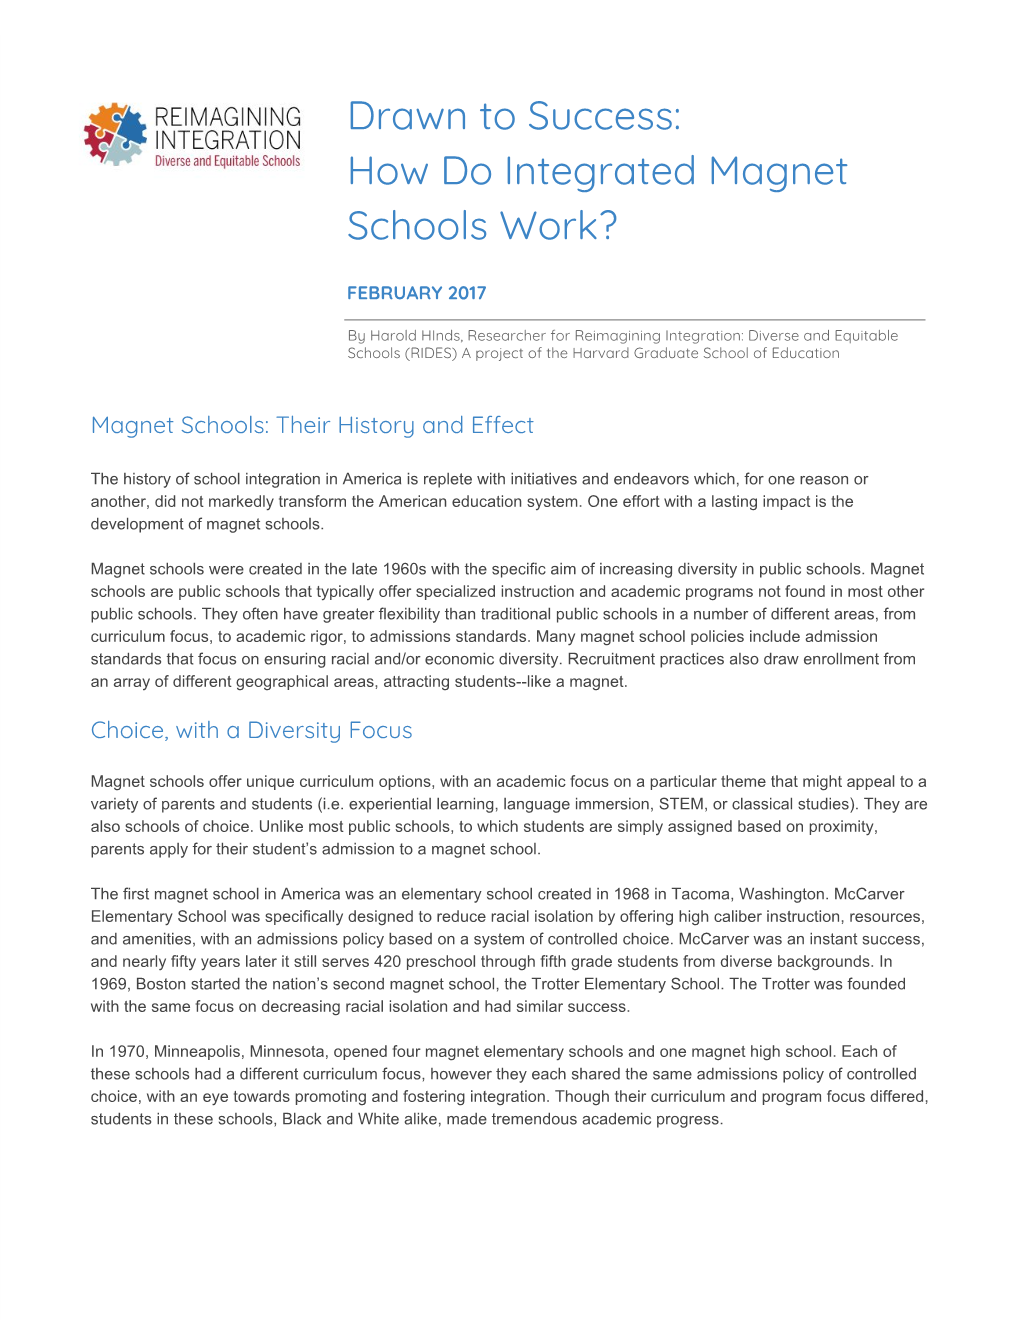 How Do Integrated Magnet Schools Work?